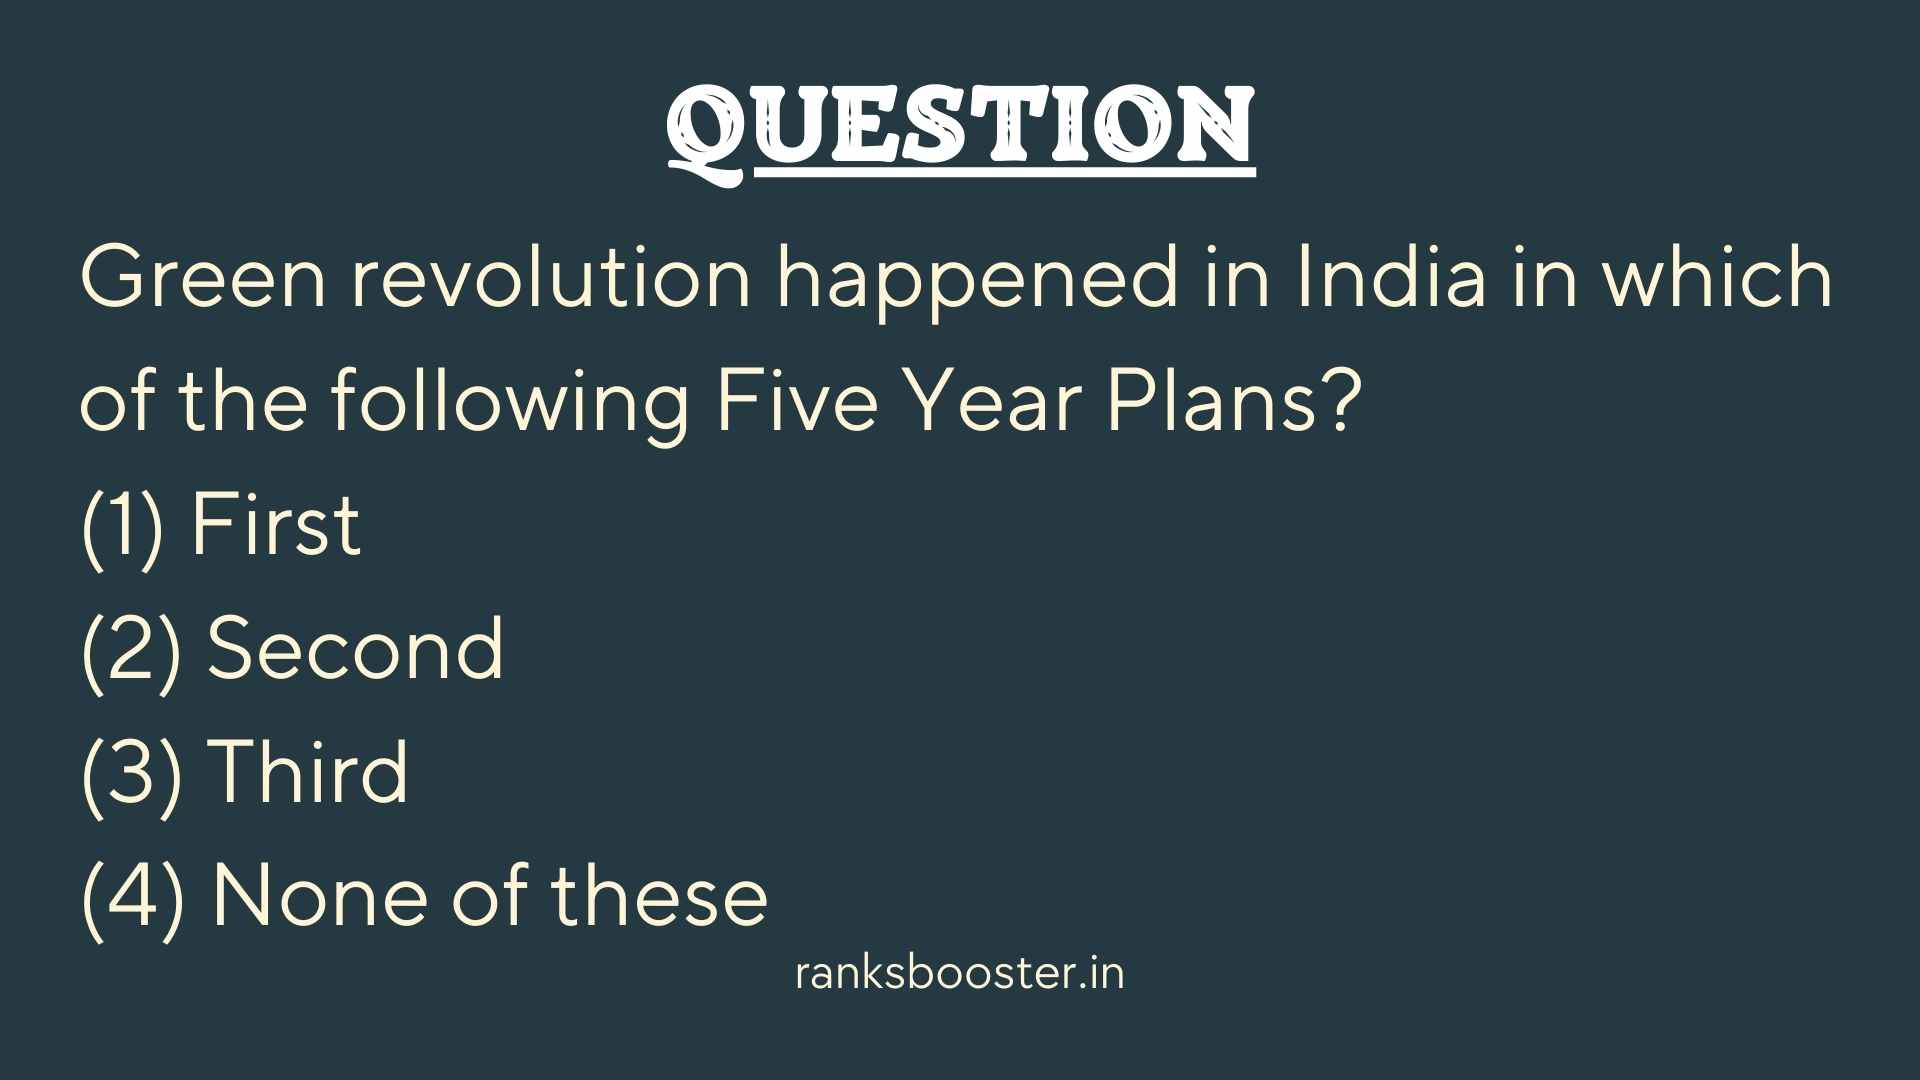 Green revolution happened in India in which of the following Five Year Plans?